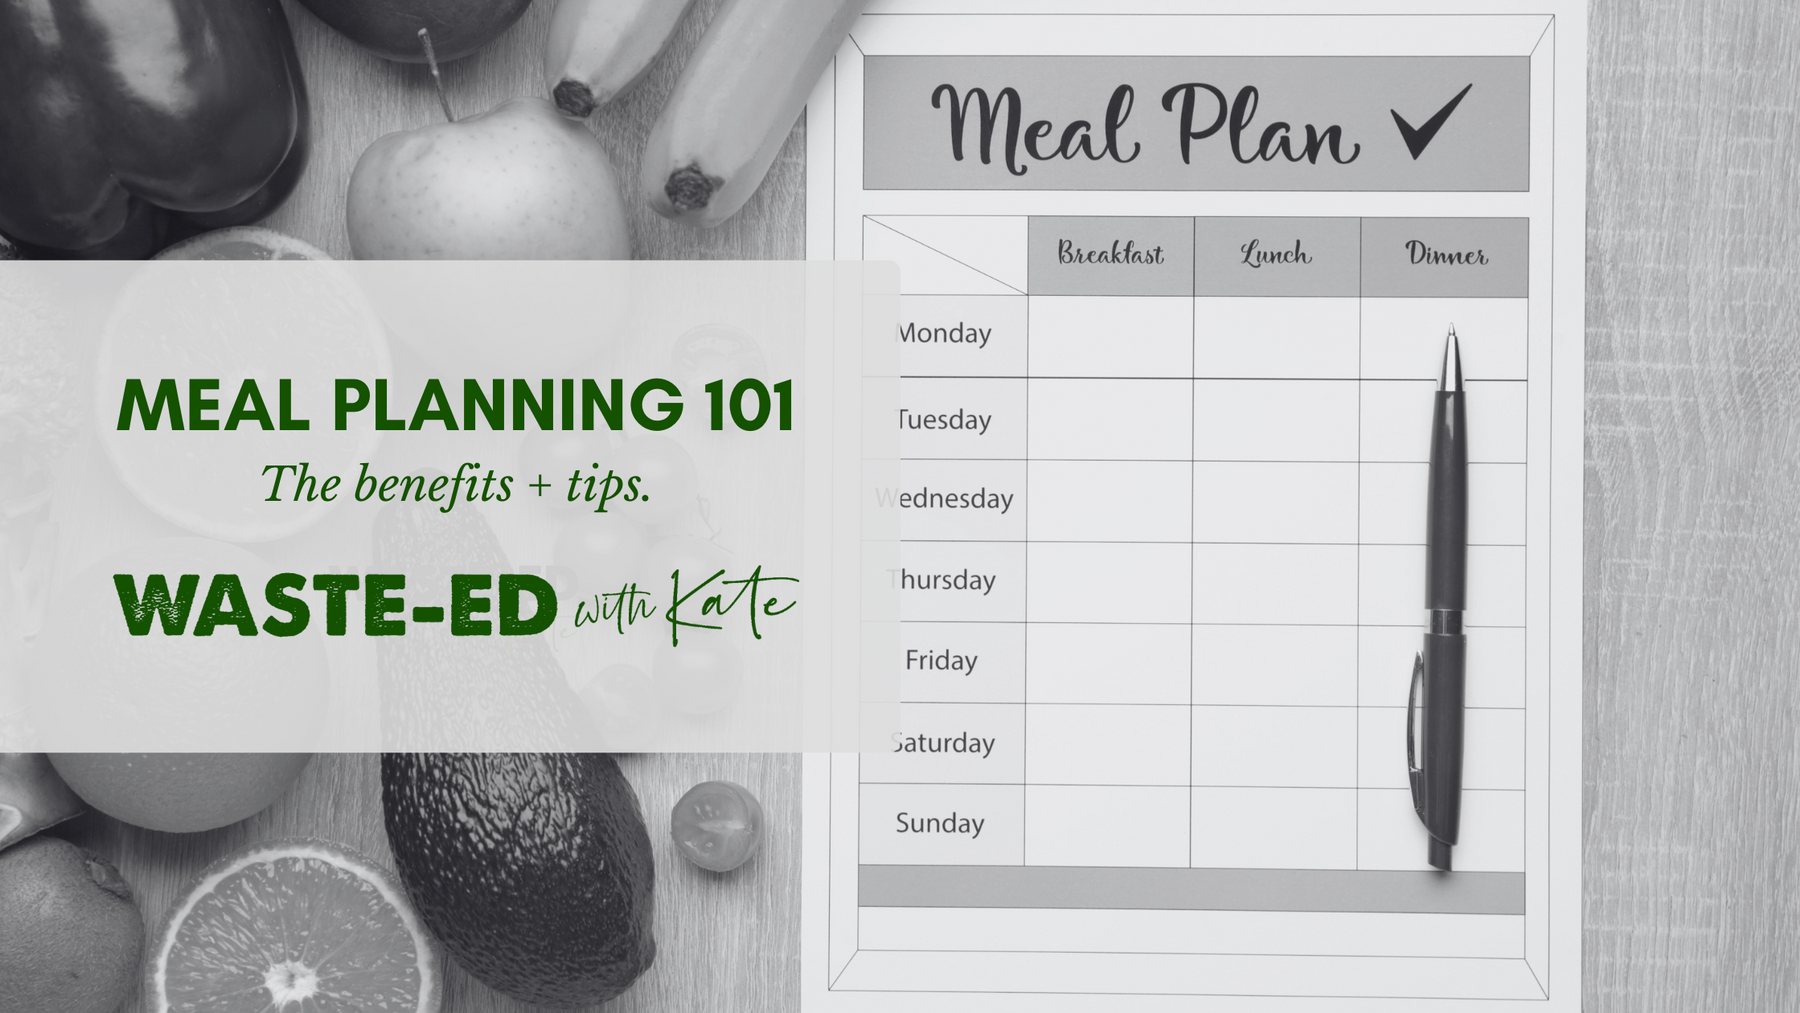 Meal Planning 101: The benefits + tips & tricks.